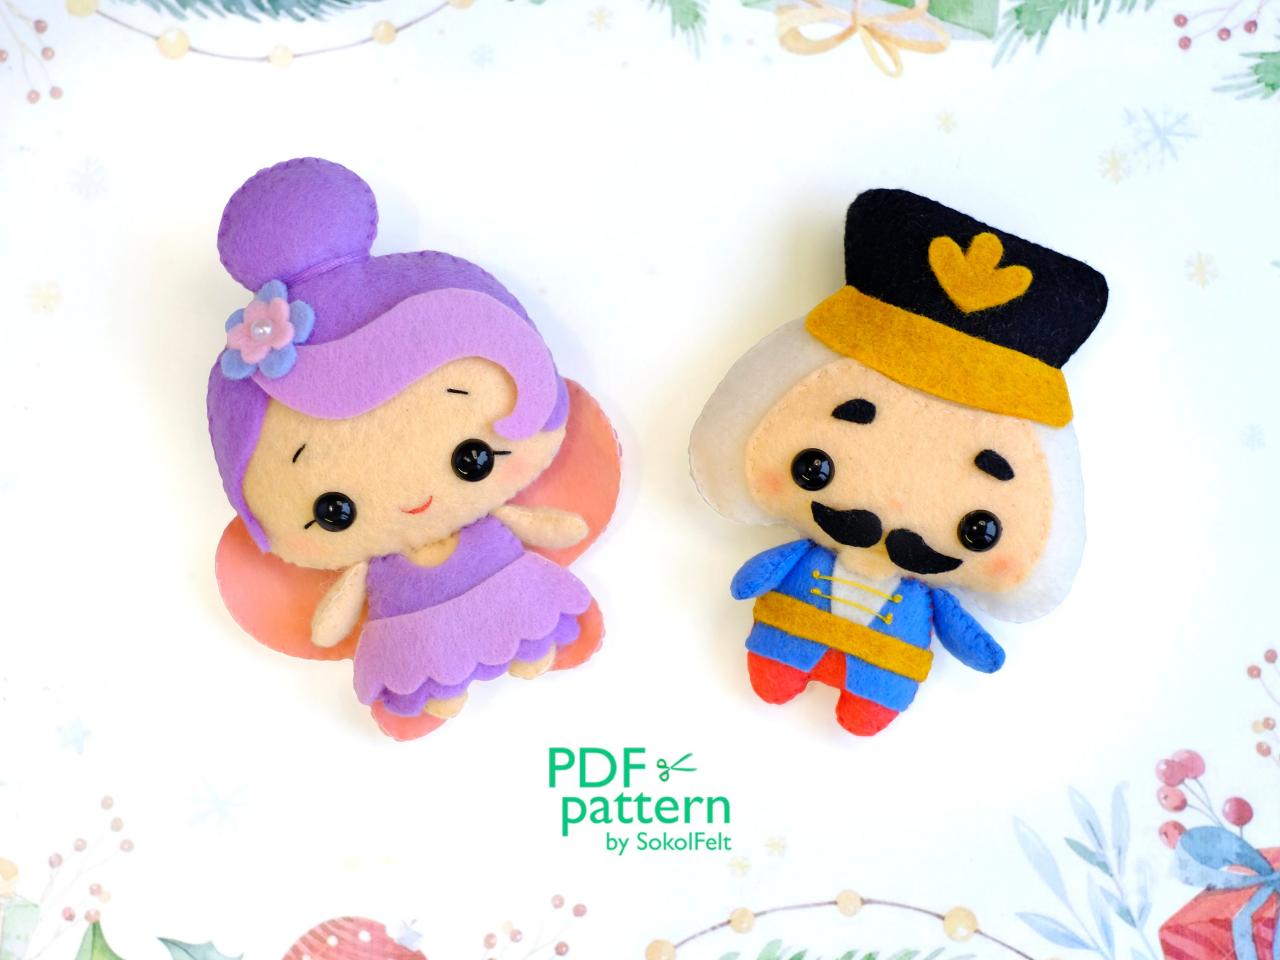 Nutcracker and Sugar plum fairy felt toy sewing PDF and SVG patterns, Christmas tree plush ornament, baby crib mobile toy